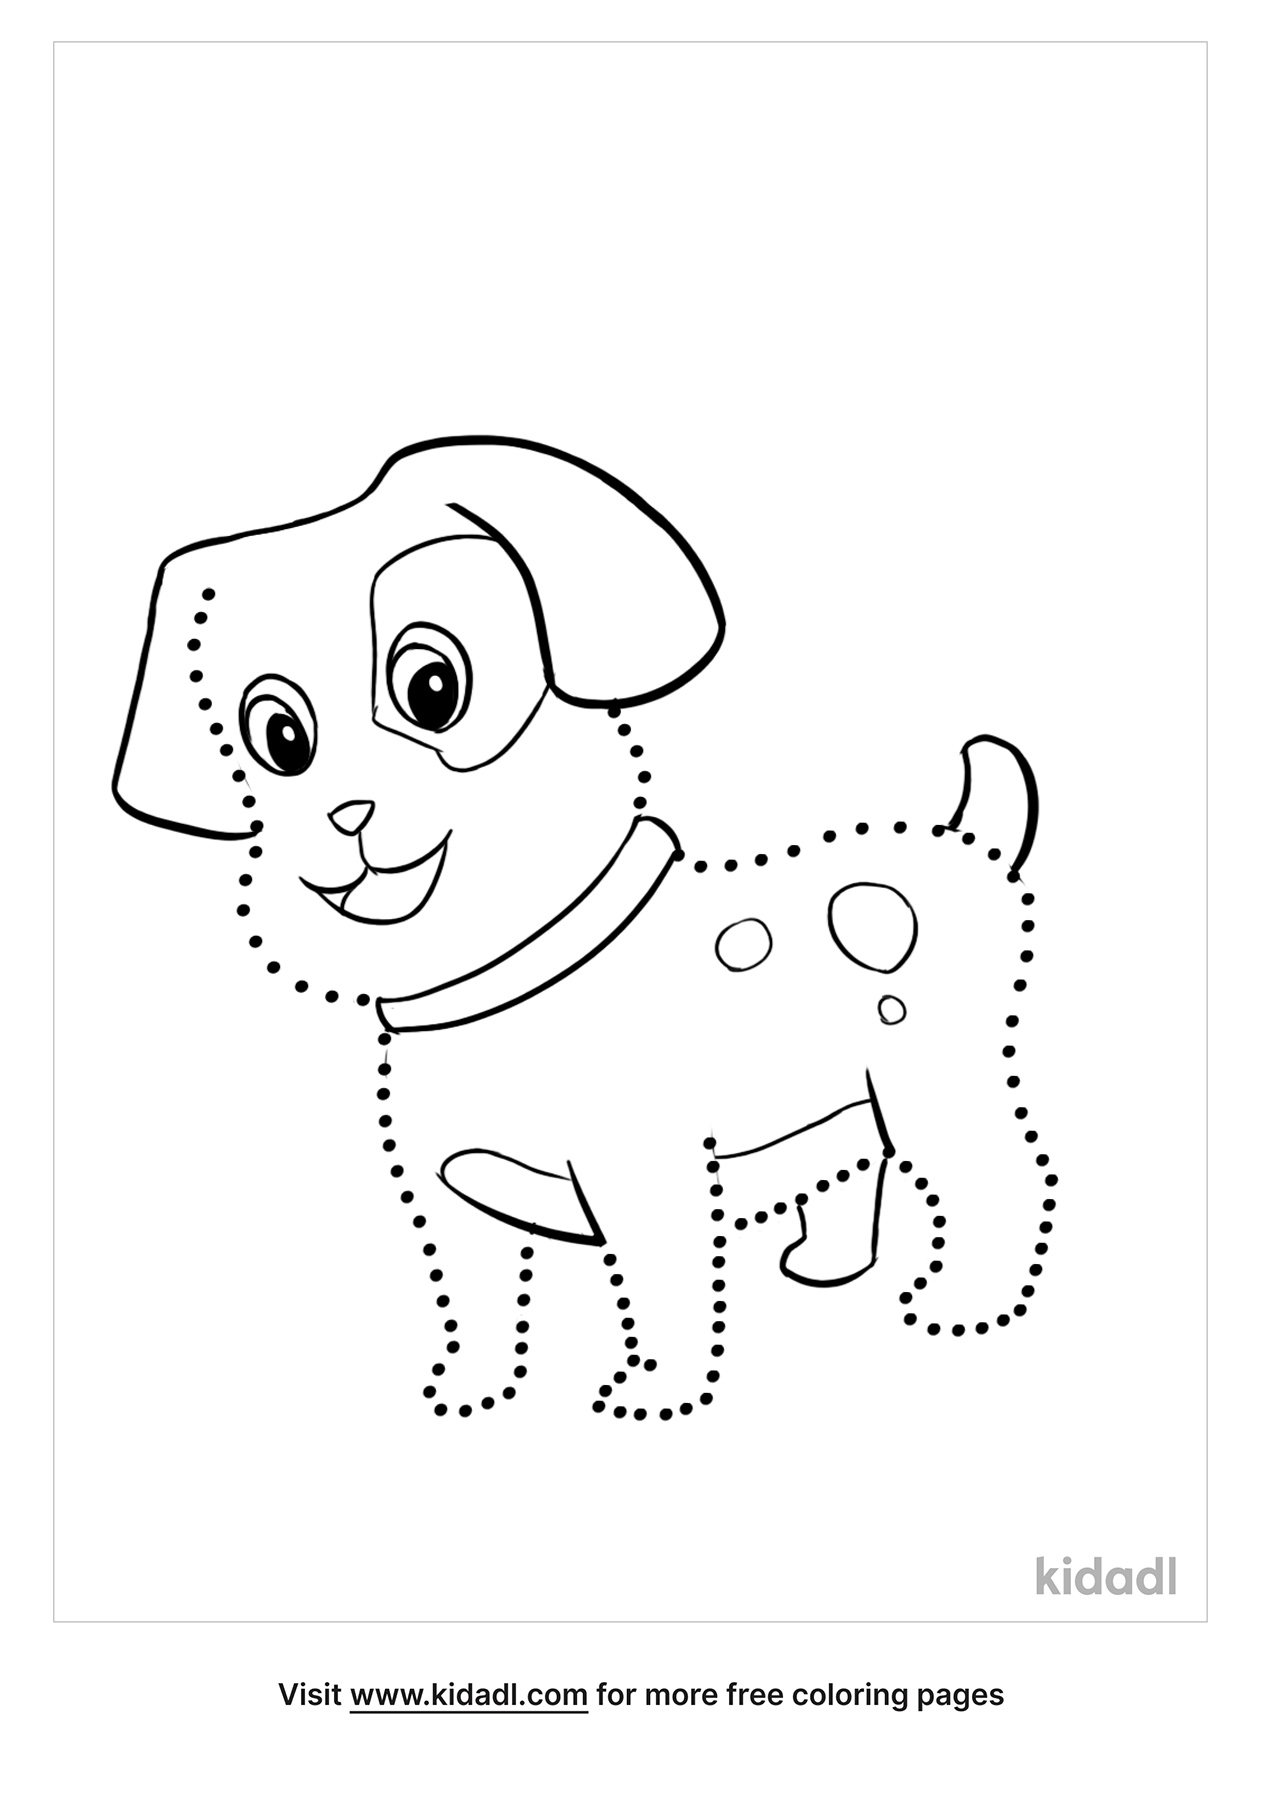 Dot To Dot Dog Coloring Pages | Free Animals Coloring Pages | Kidadl